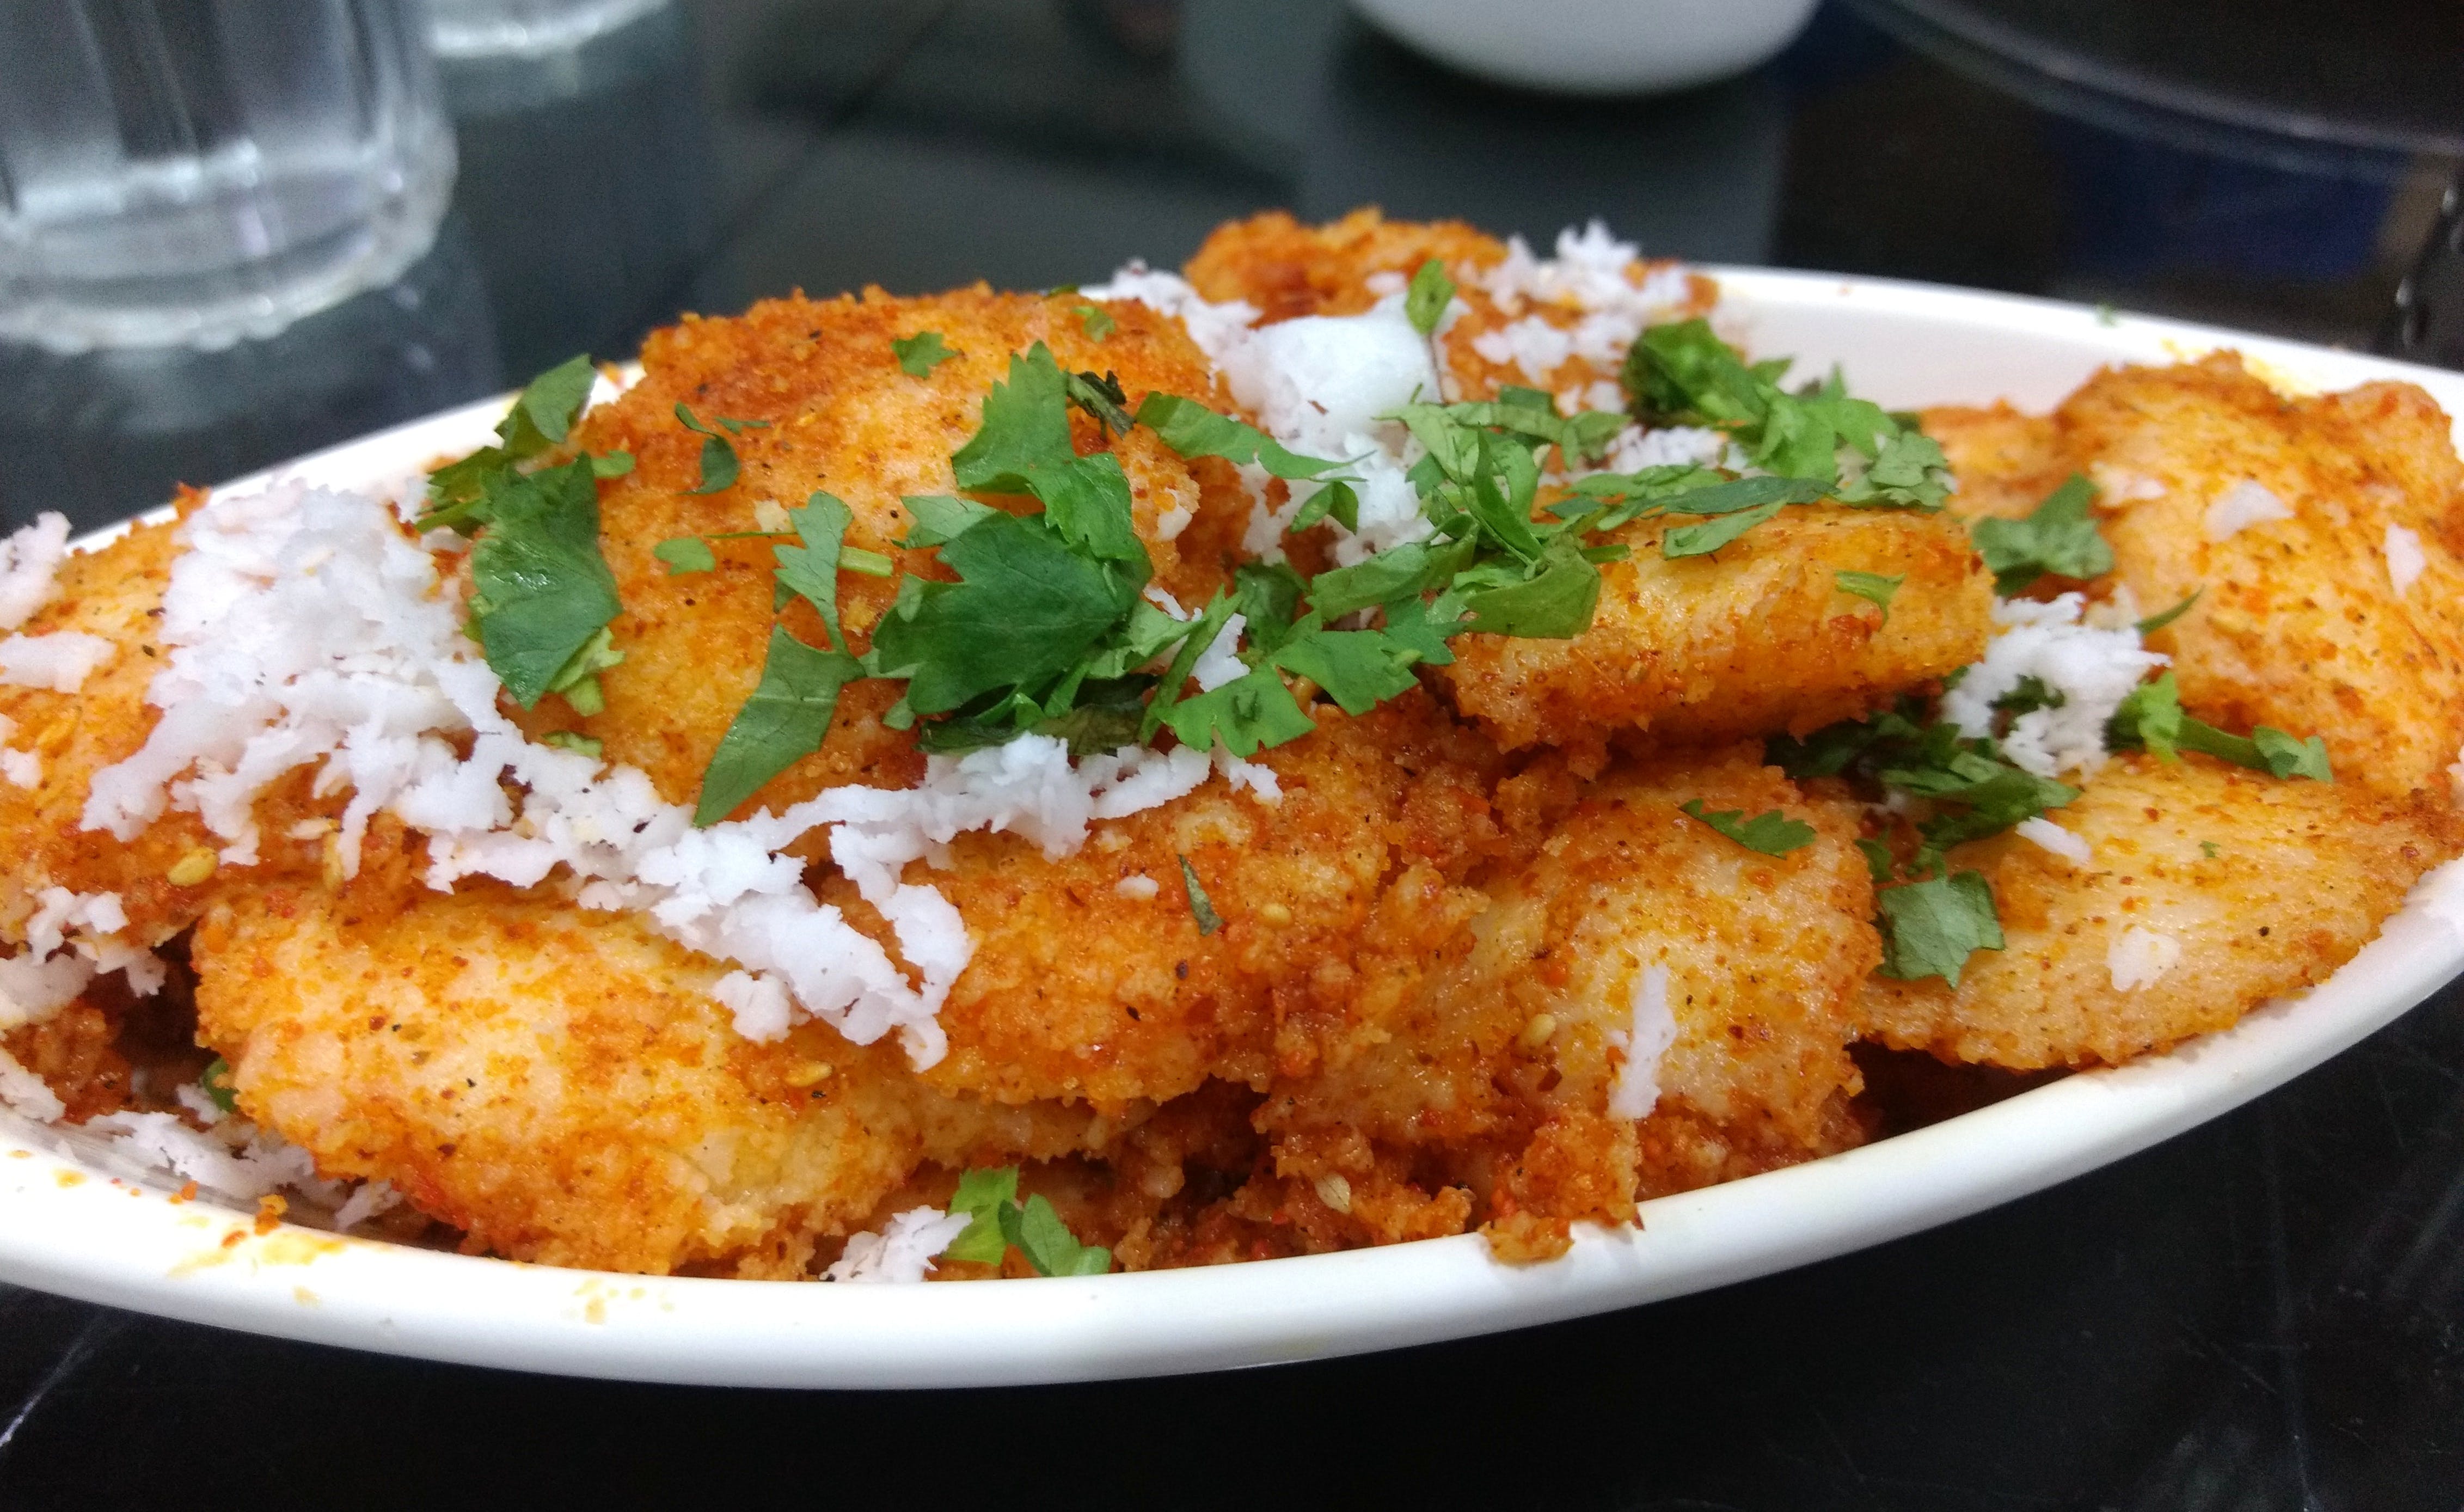 Dish,Food,Cuisine,Fried food,Ingredient,Cutlet,Produce,Hash browns,Staple food,Fritter